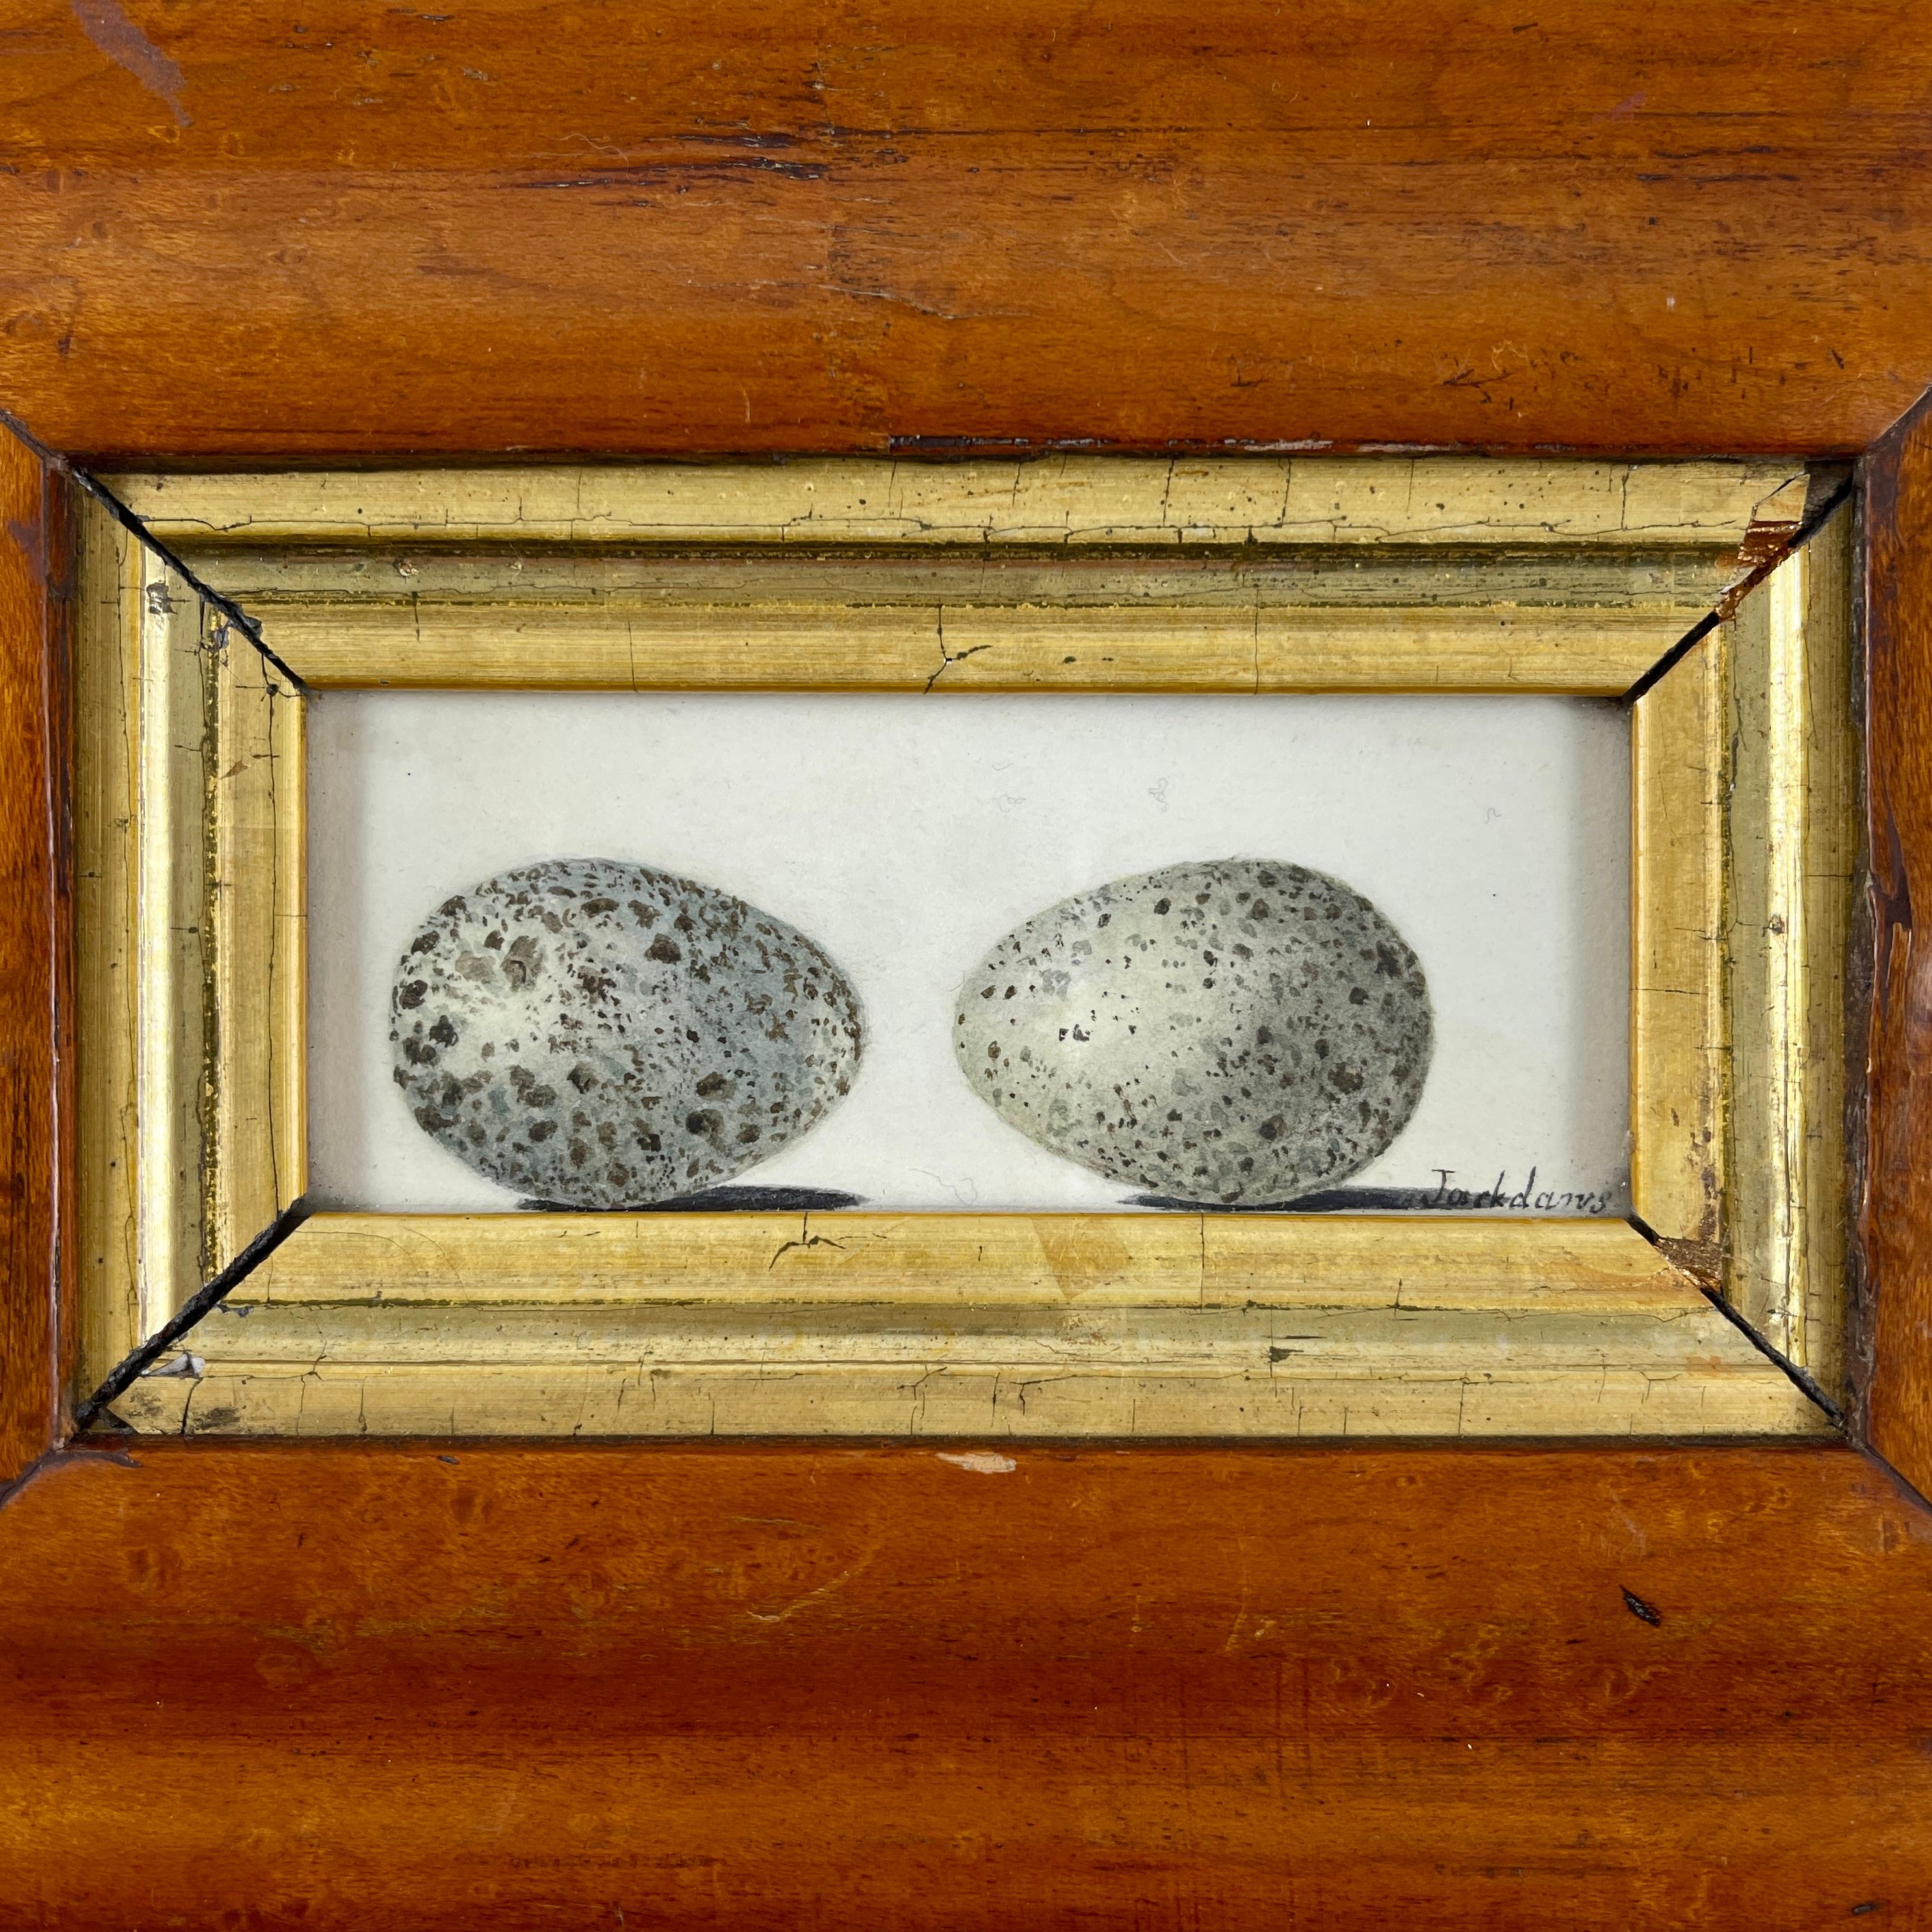 An original British School Regency Period watercolor study of two birds eggs, mounted in a Georgian Period Birdseye Maple frame – Circa 1835.

These watercolors were largely painted by young girls from aristocratic families during the Jane Austen